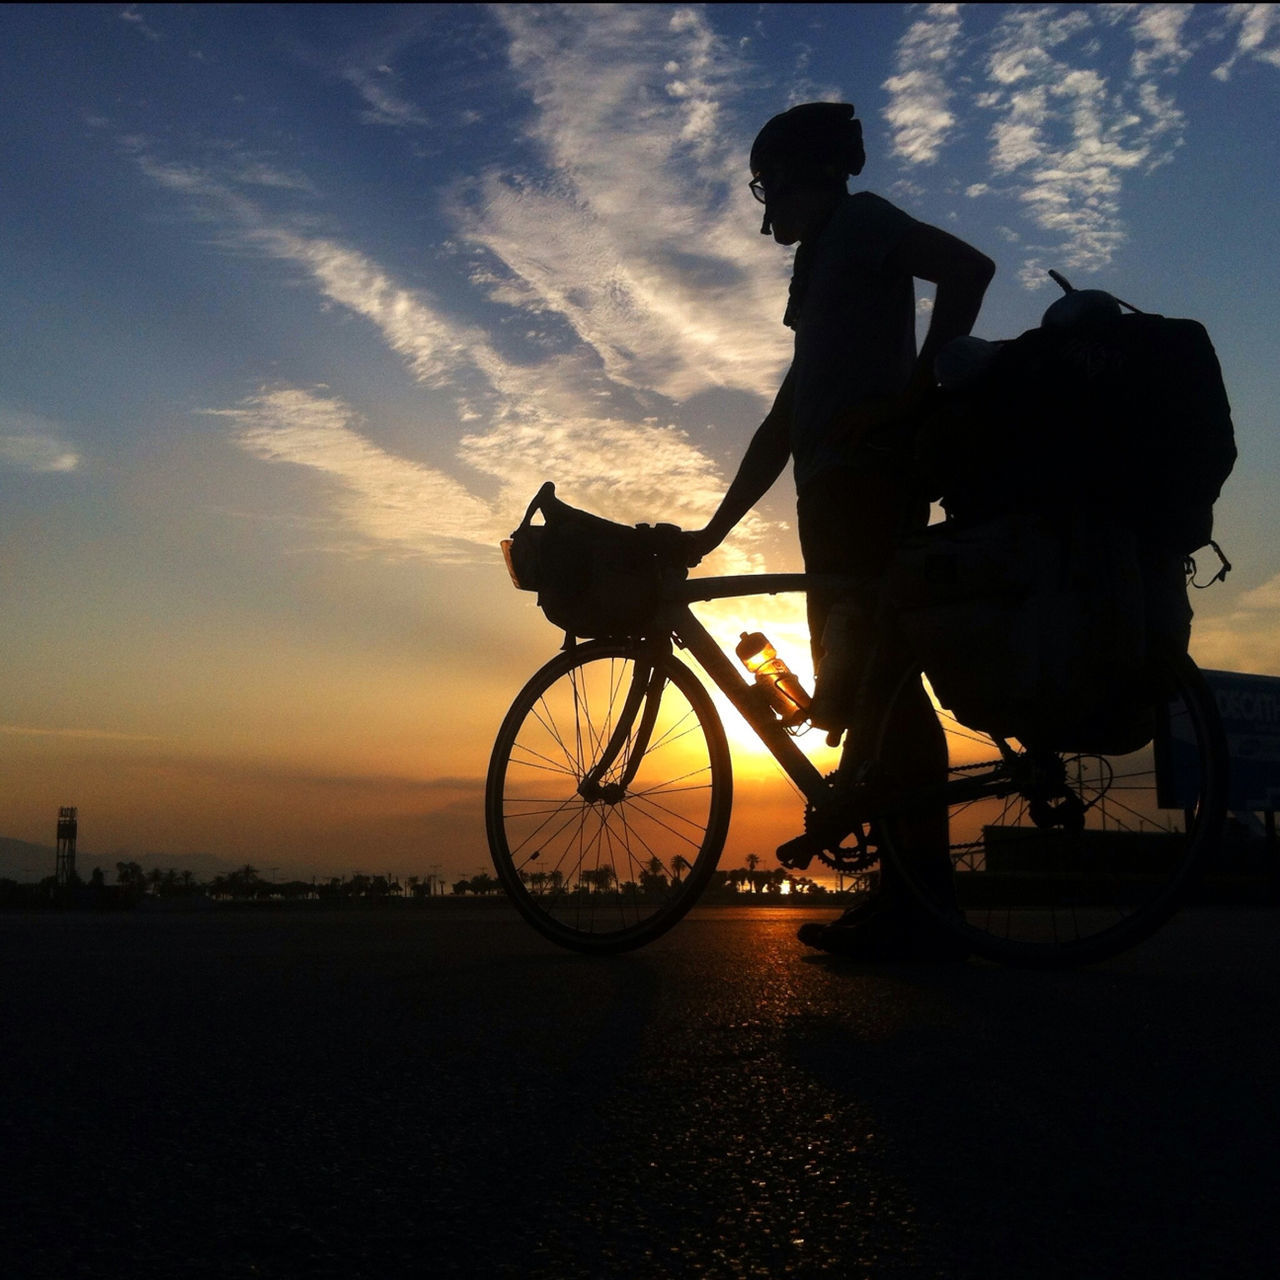 bicycle, transportation, mode of transport, land vehicle, riding, men, cycling, silhouette, sky, leisure activity, lifestyles, full length, stationary, motorcycle, side view, sunset, on the move, travel